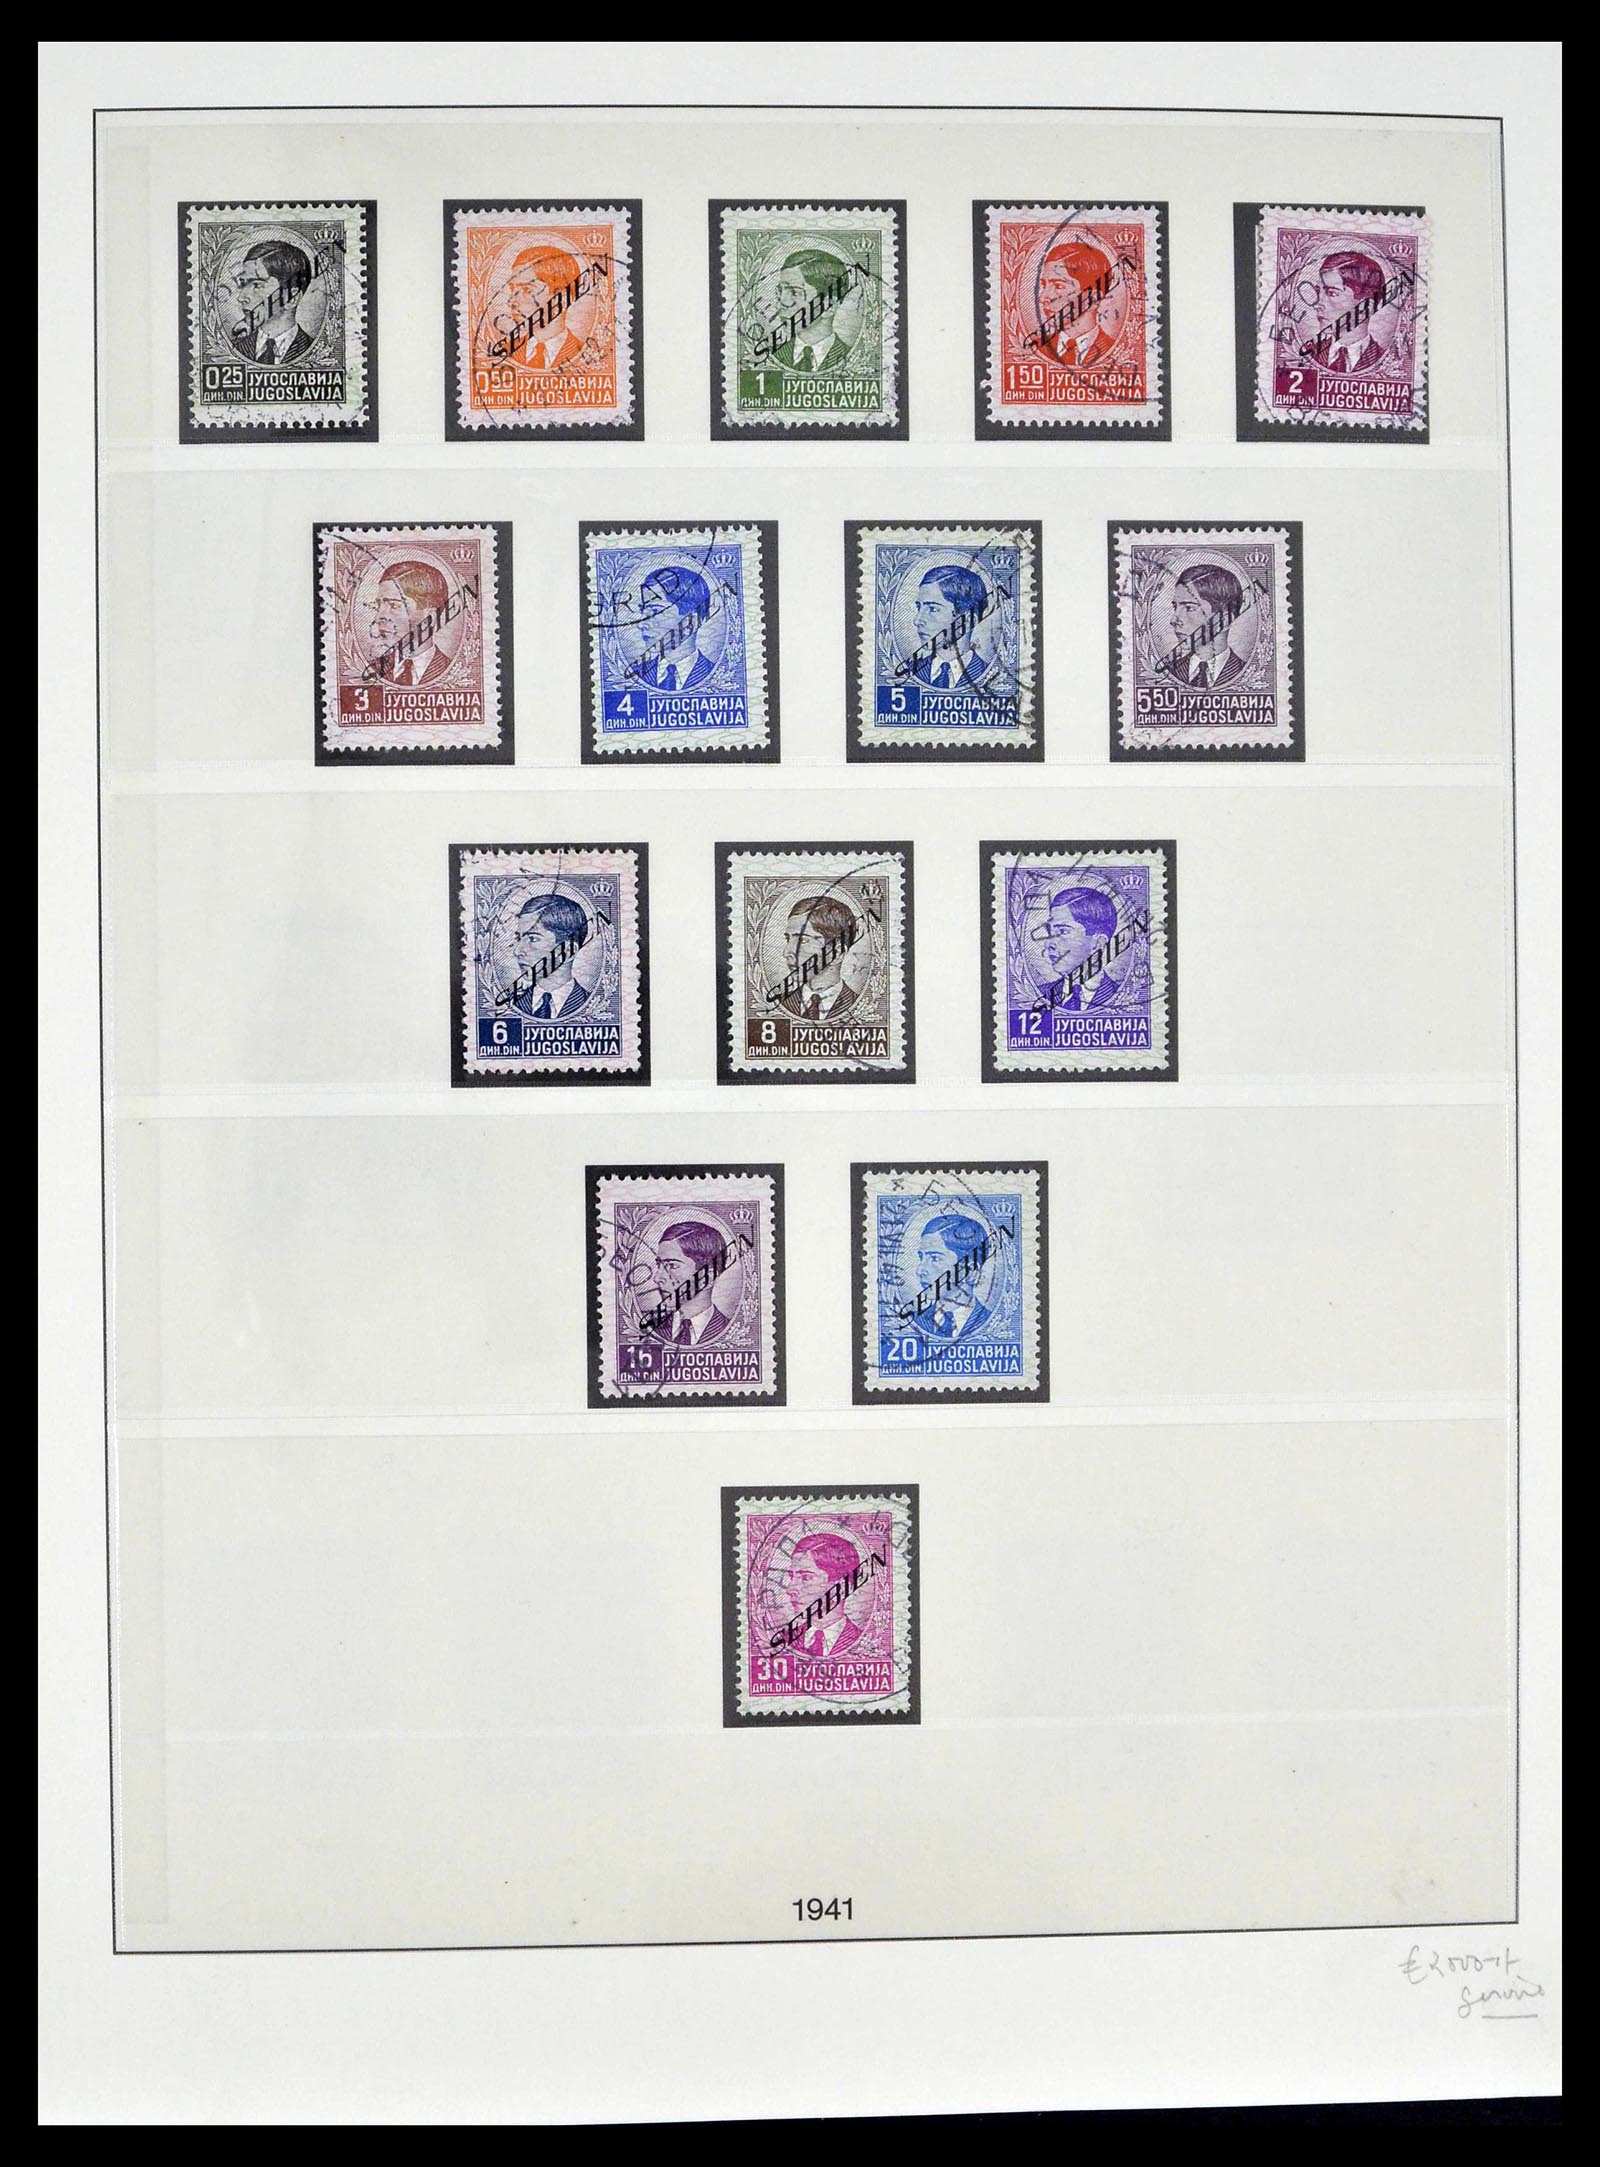 39396 0013 - Stamp collection 39396 German occupation WW II 1939-1945.